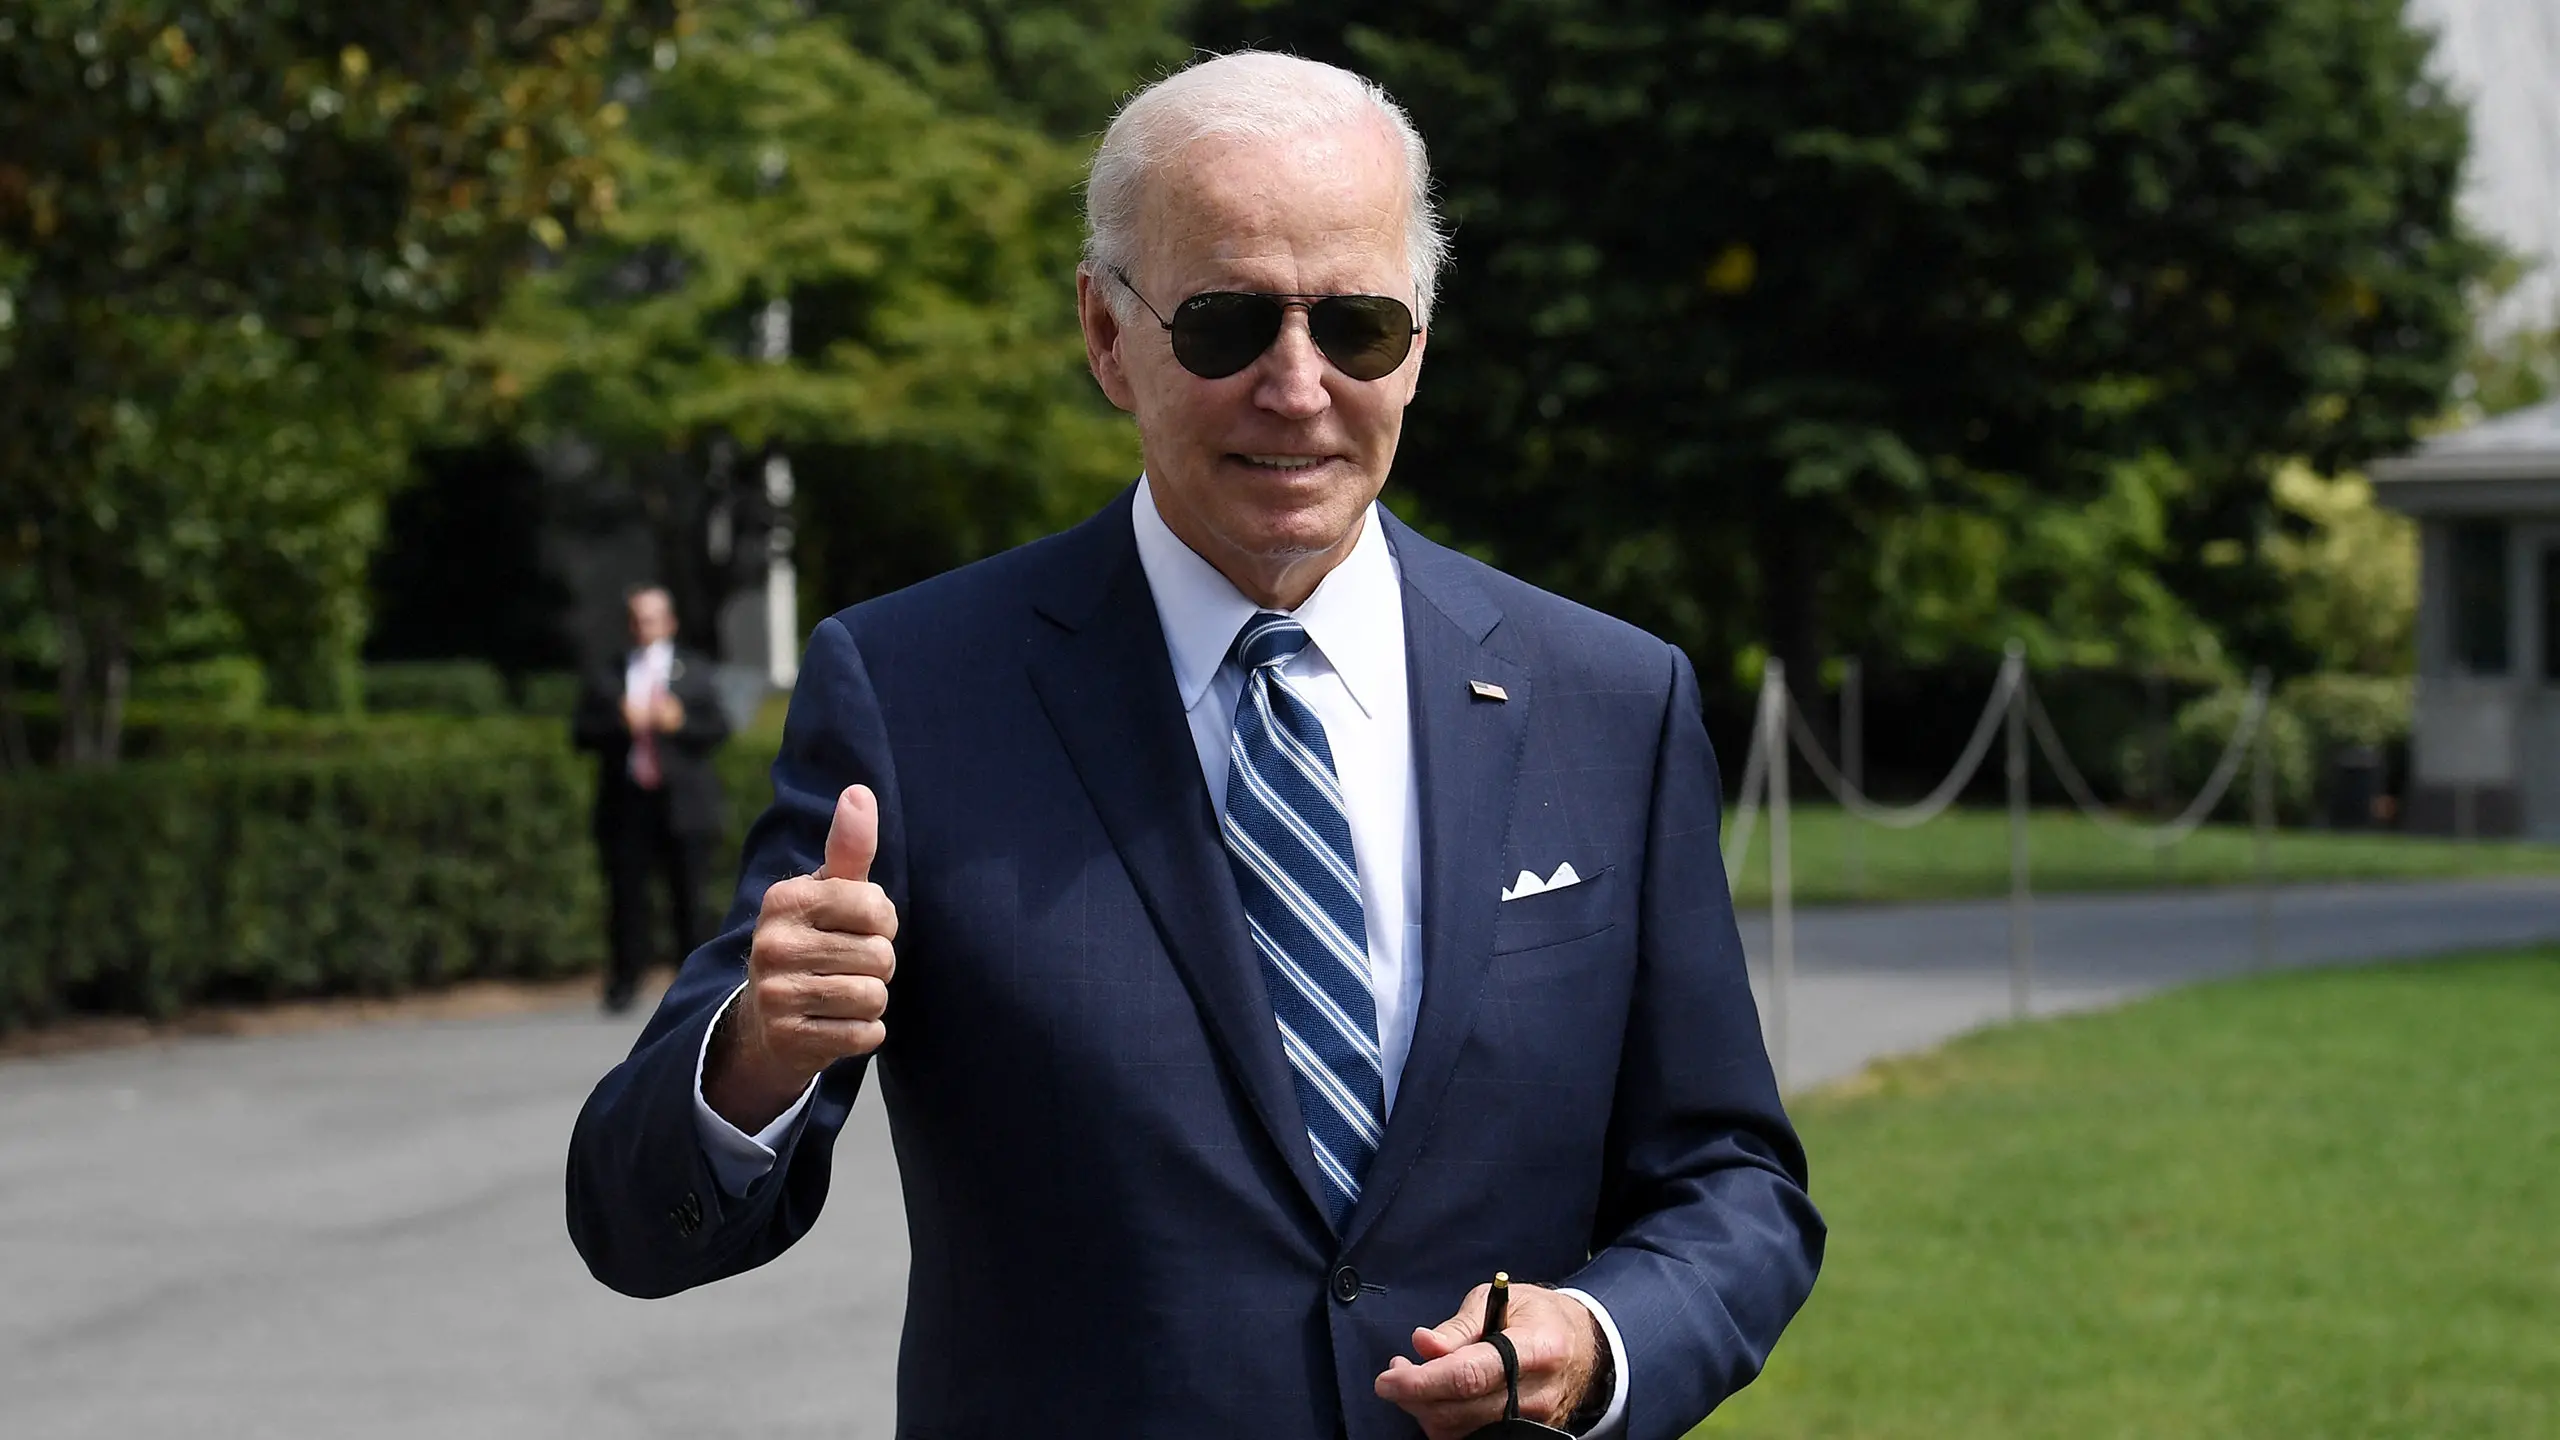 We can take care of helping Ukraine and Israel at the same time - Biden